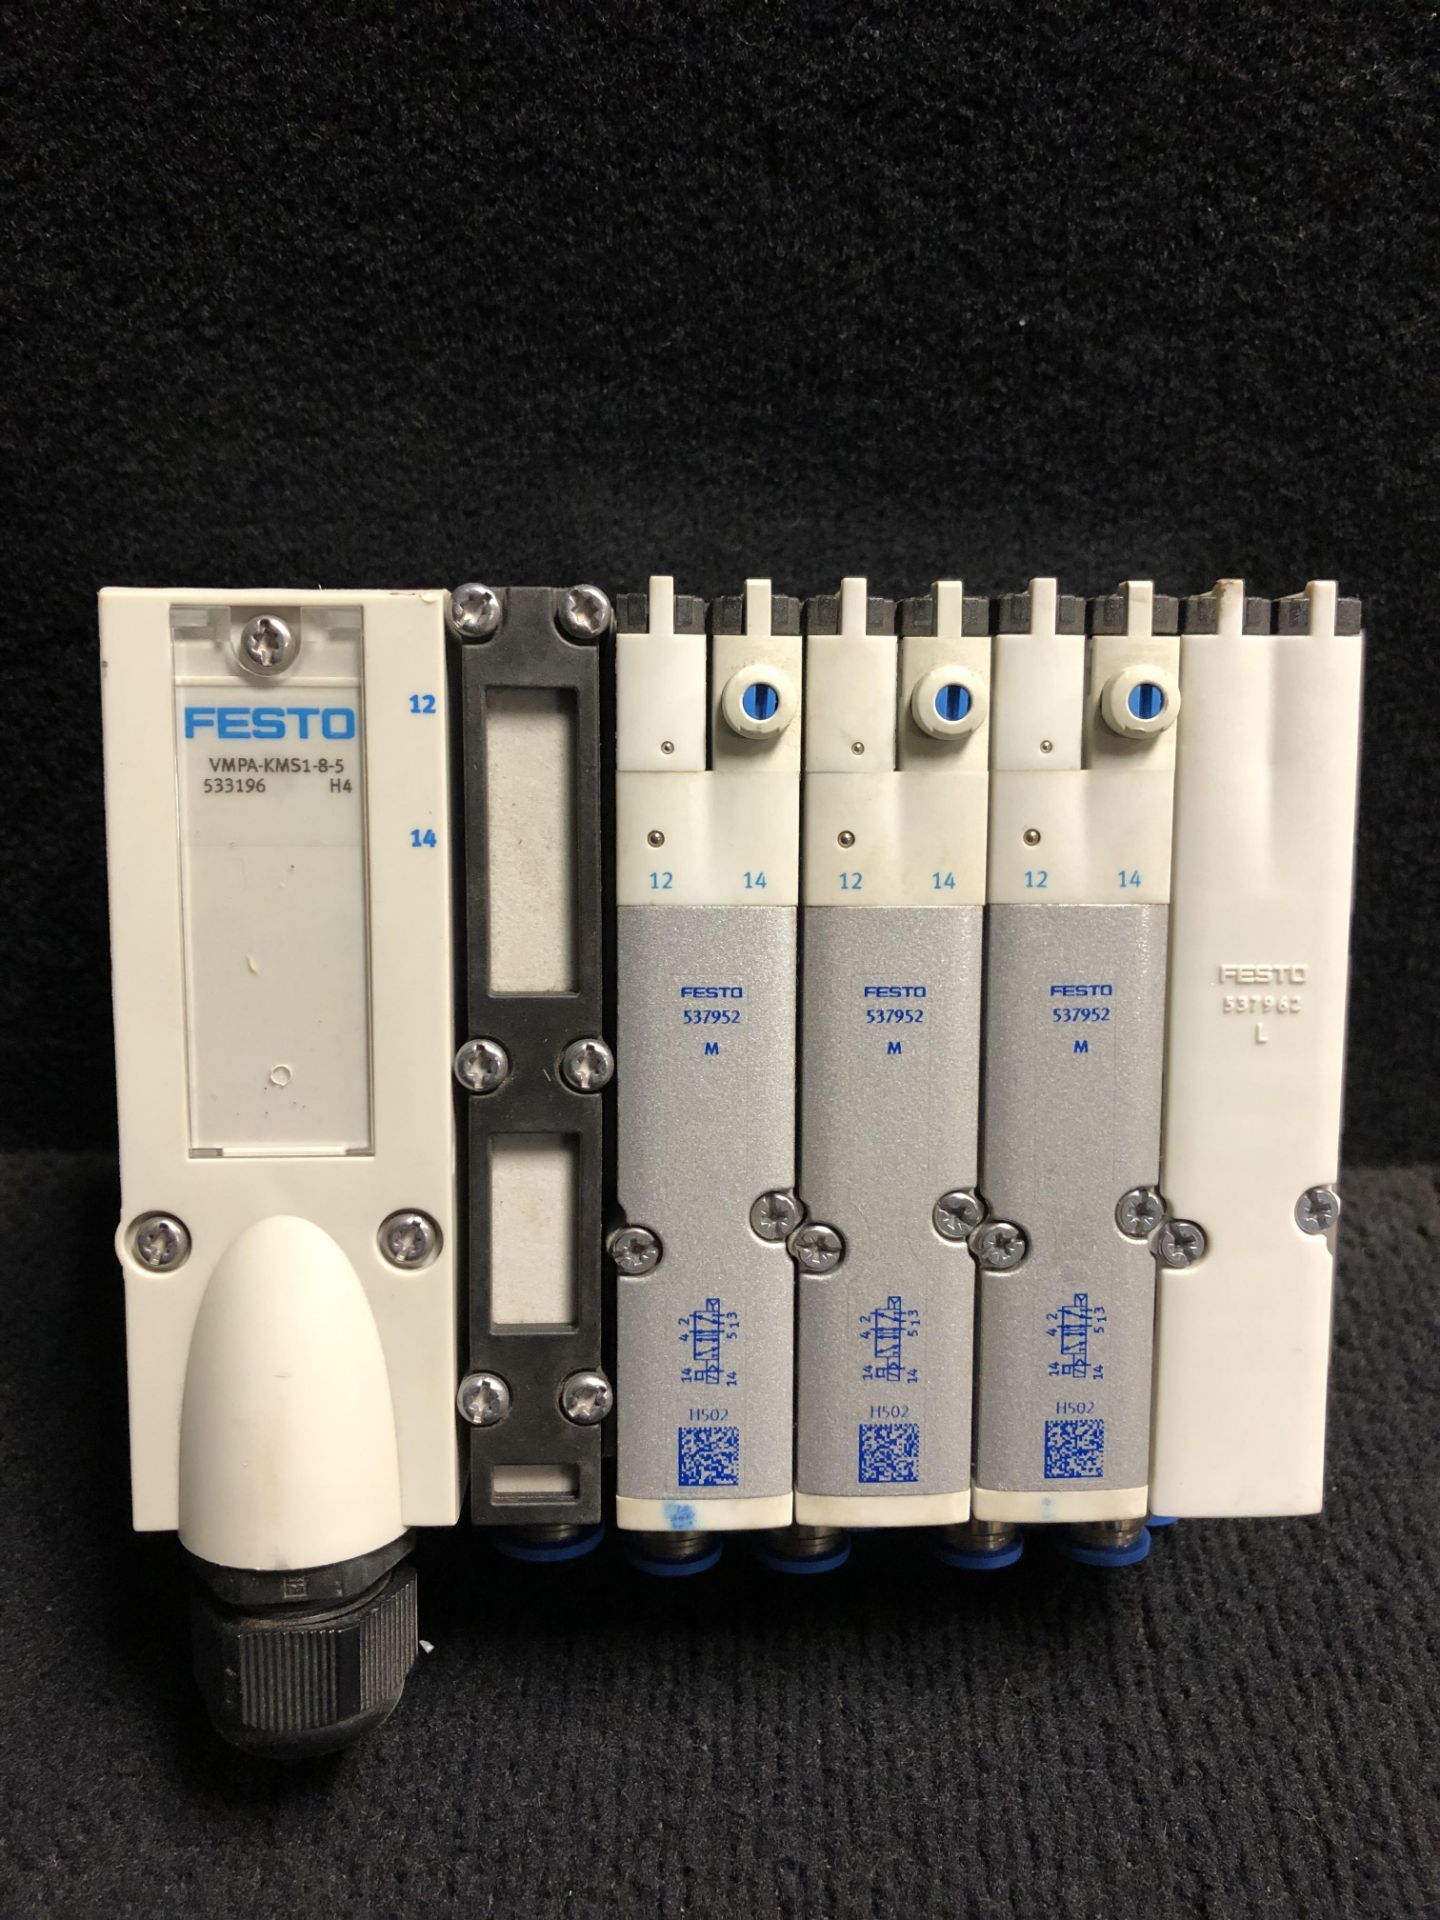 LOT OF 2 - FESTO ELECTRIC VMPA-KMS1-8-5 CONNECTING CABLE & VMPA2-MPM-EMM-4 ELECTRICAL MODULE FOR VAL - Image 9 of 10